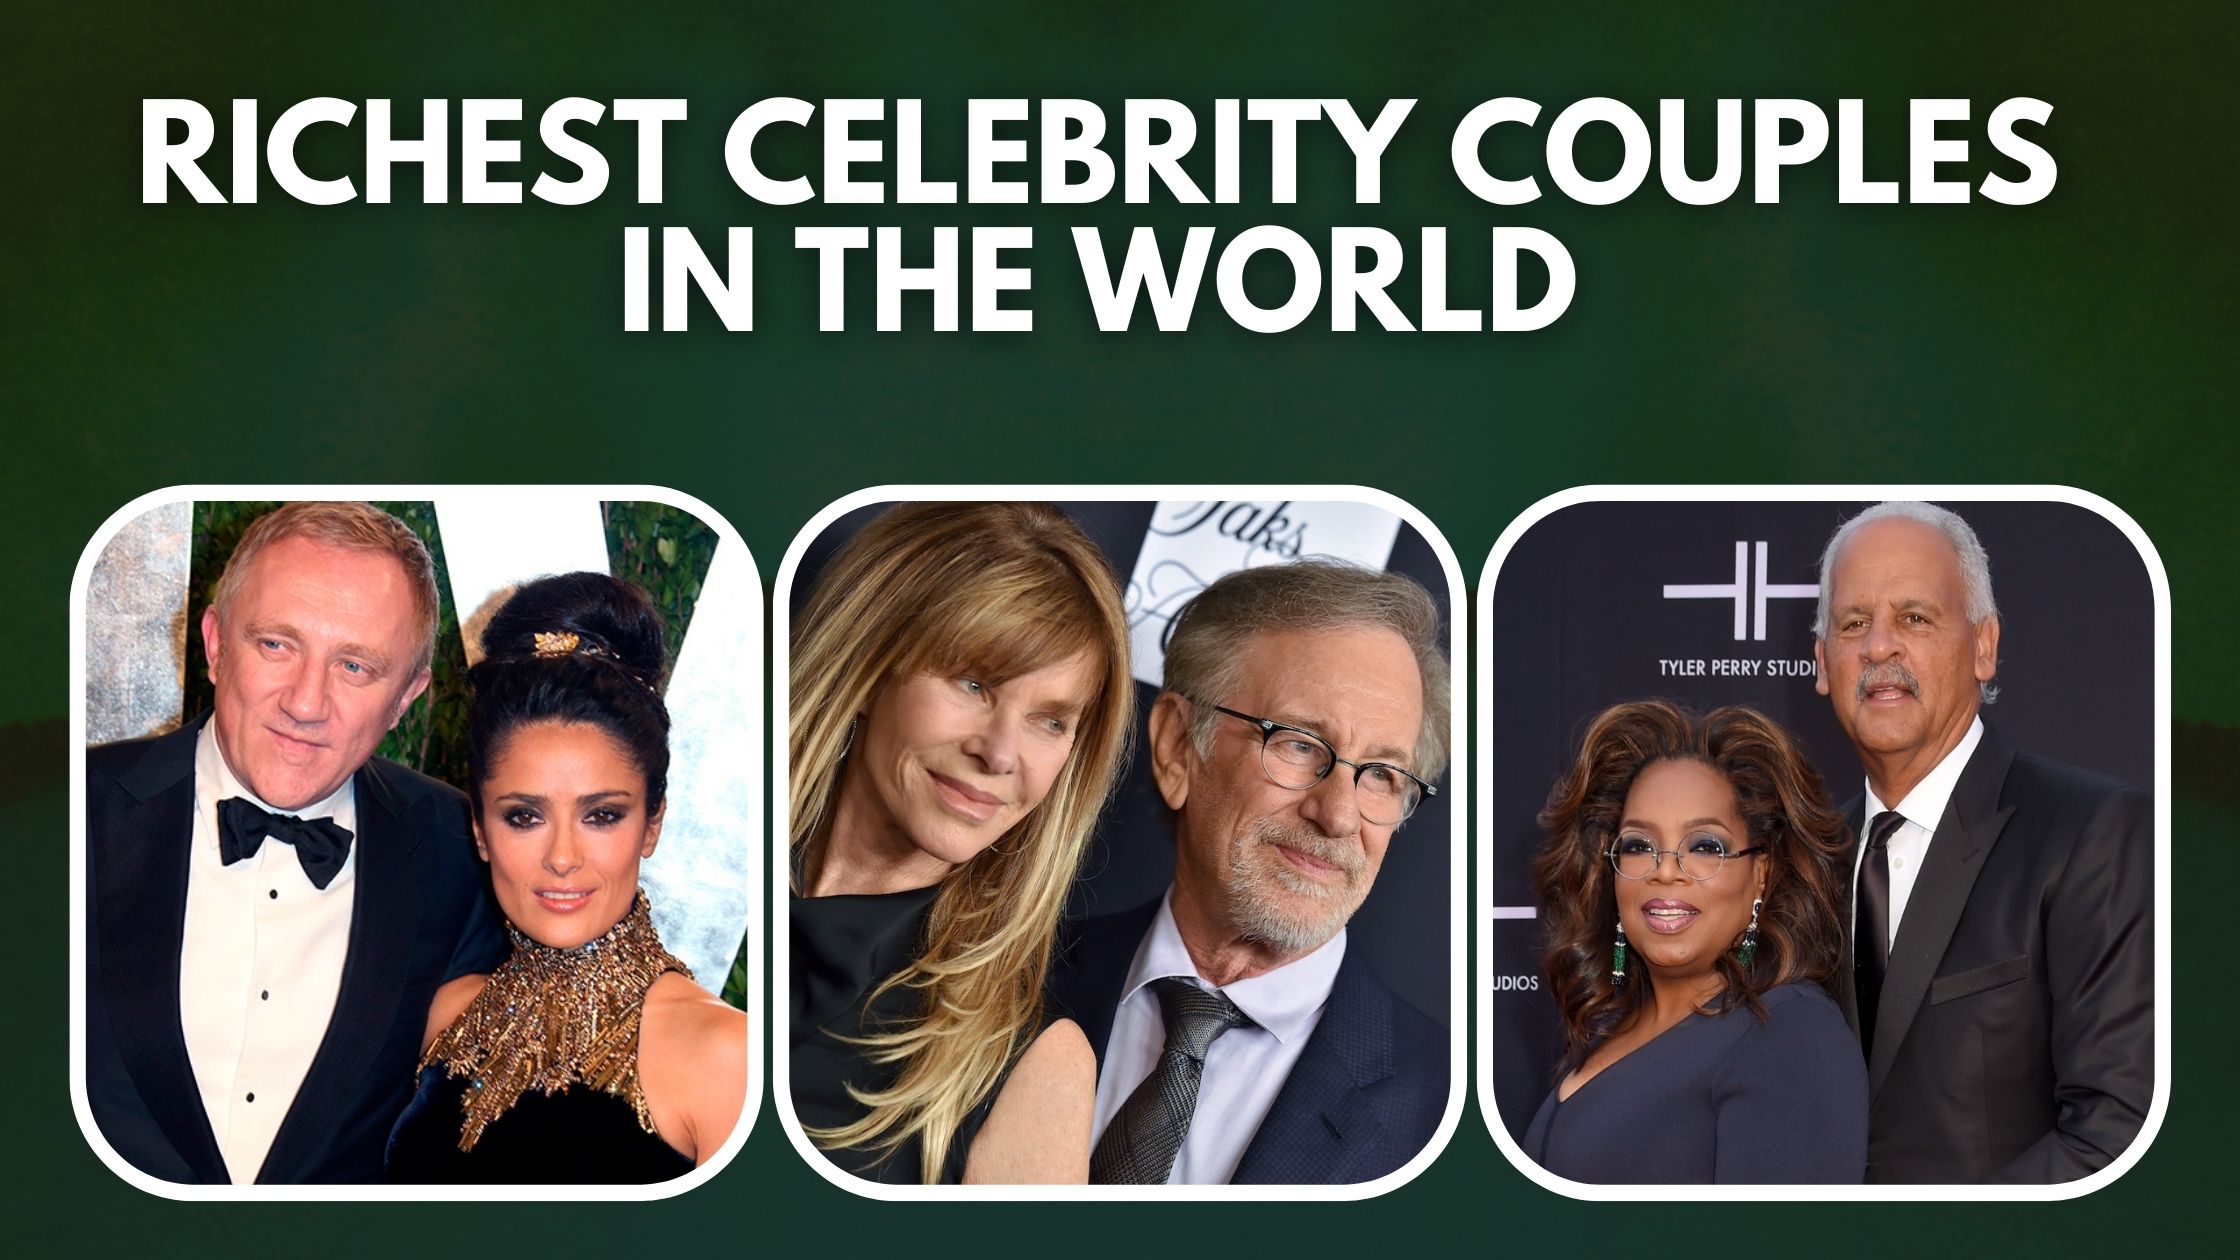 Top 10 Richest Celebrity Couples in the World 2022